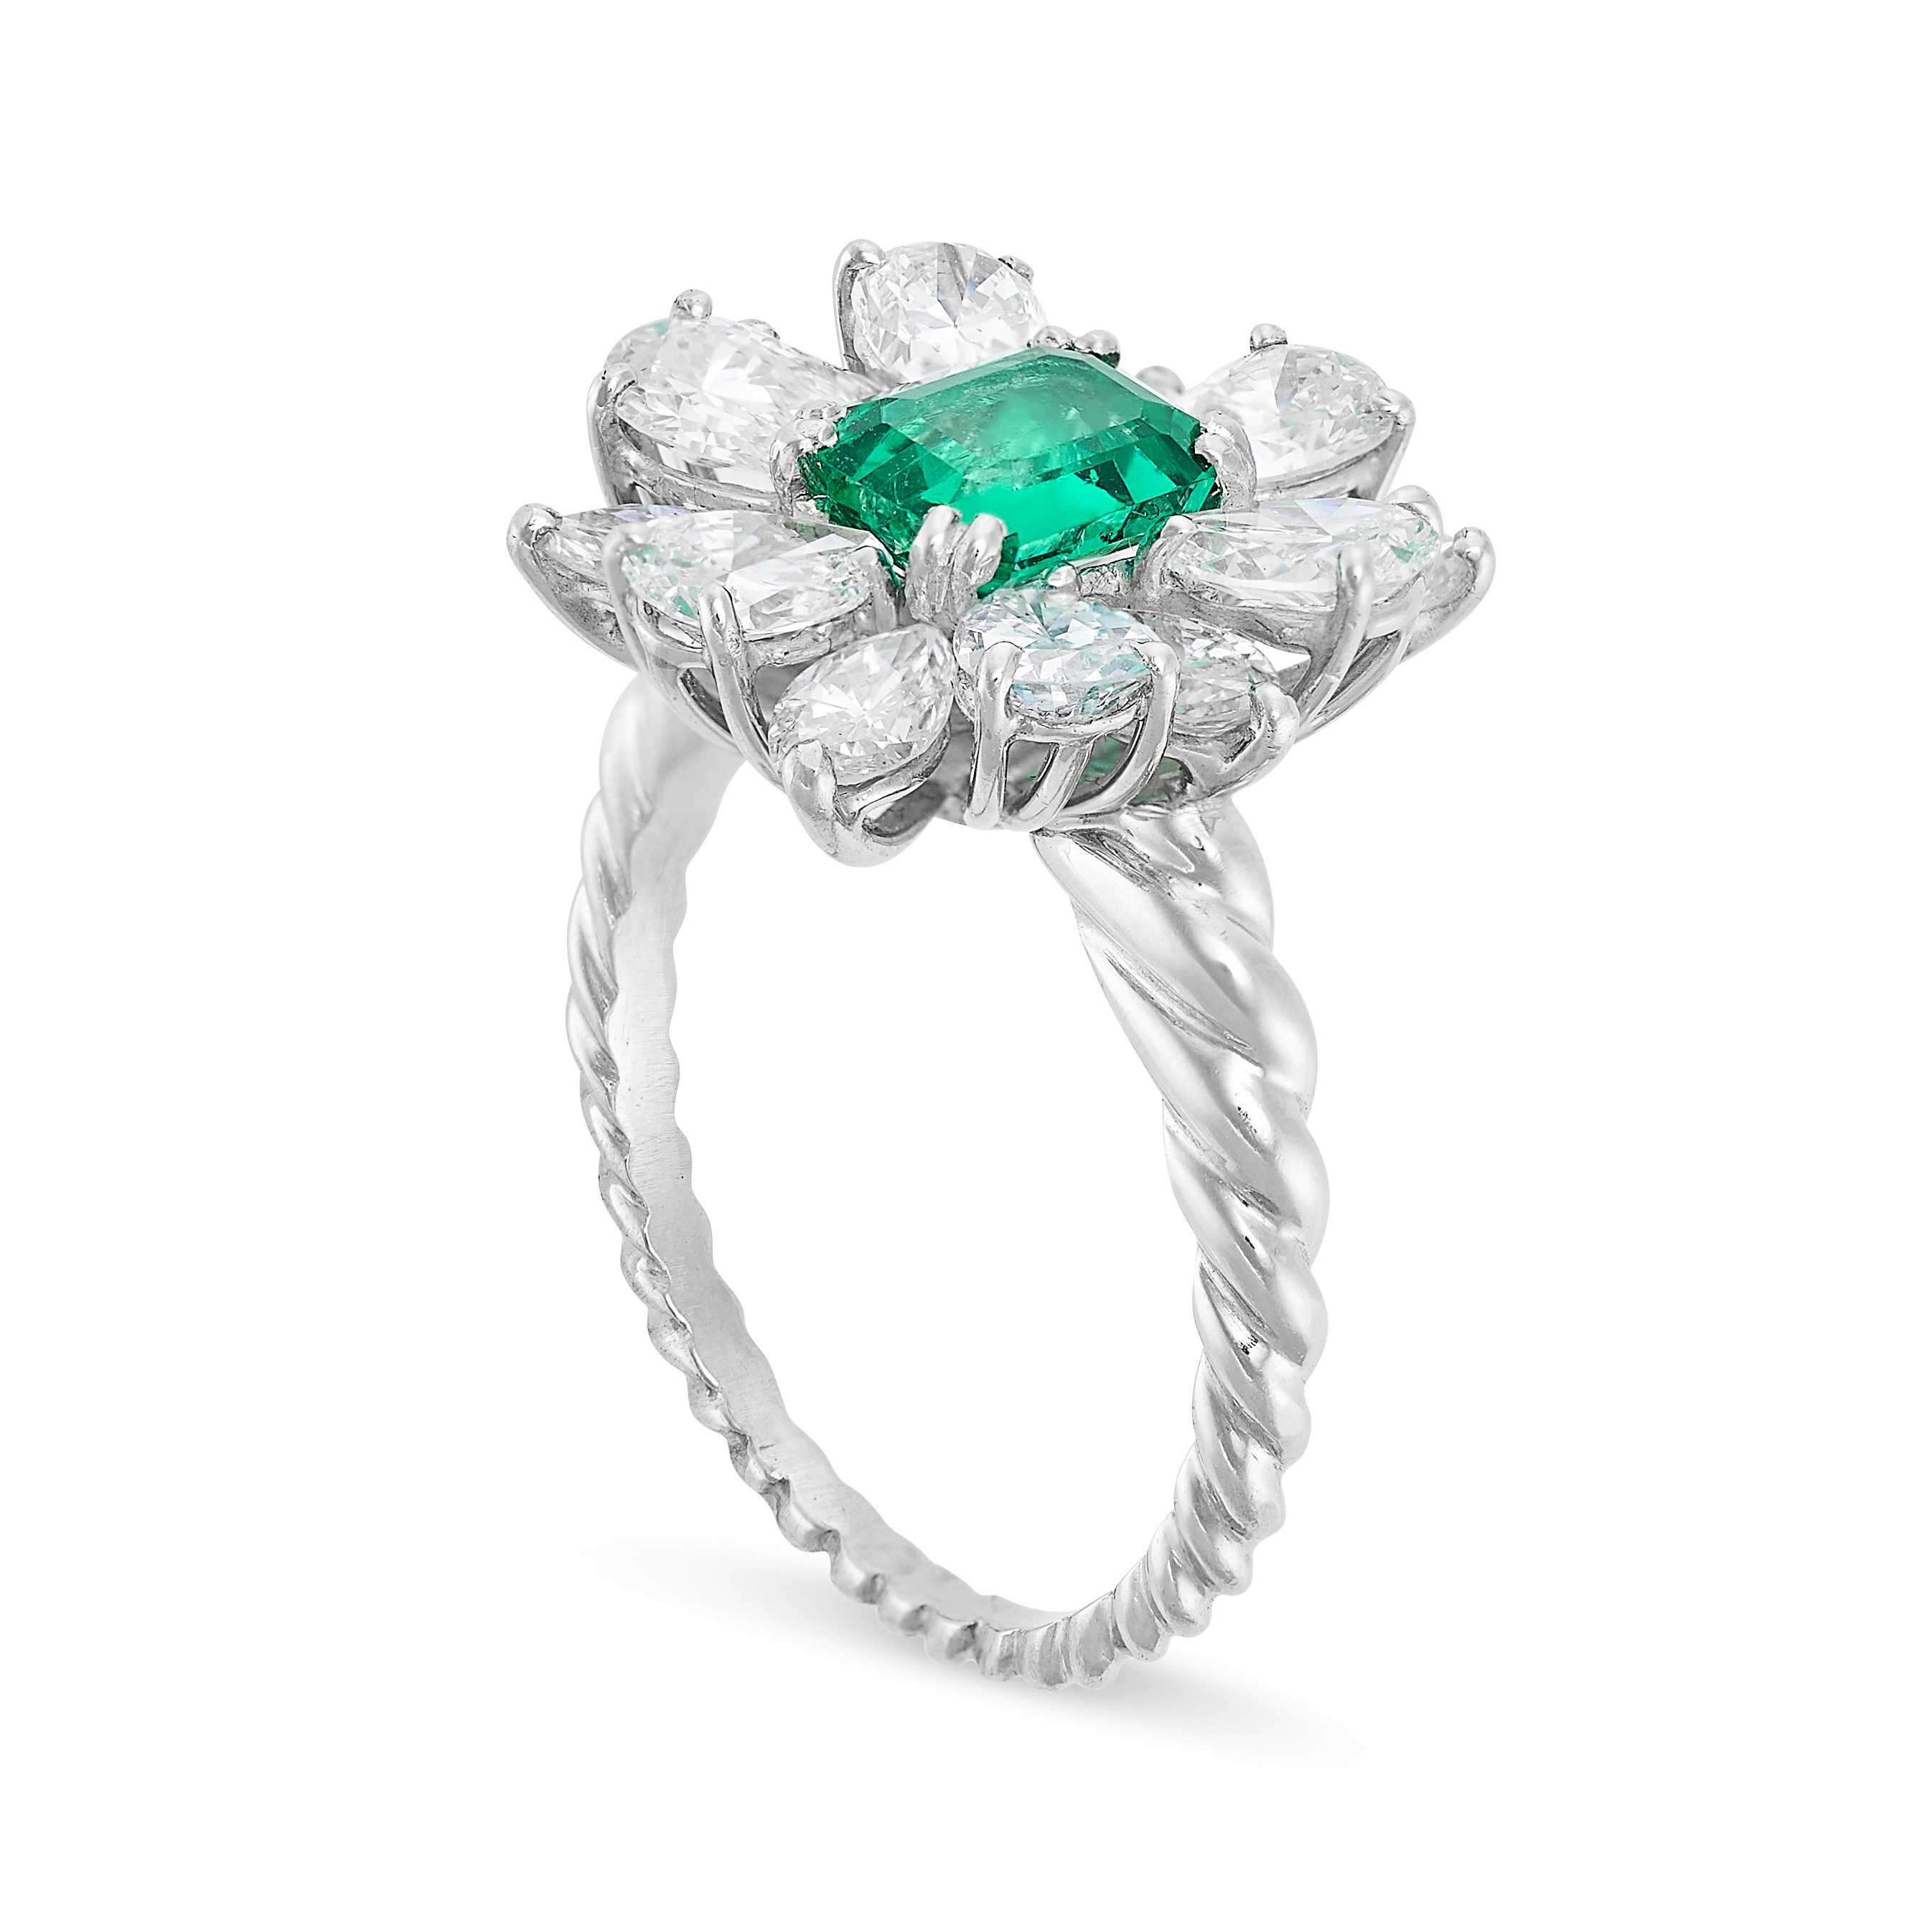 RENE KERN, A FINE EMERALD AND DIAMOND RING in platinum, set with an emerald cut emerald of 1.01 - Image 2 of 2